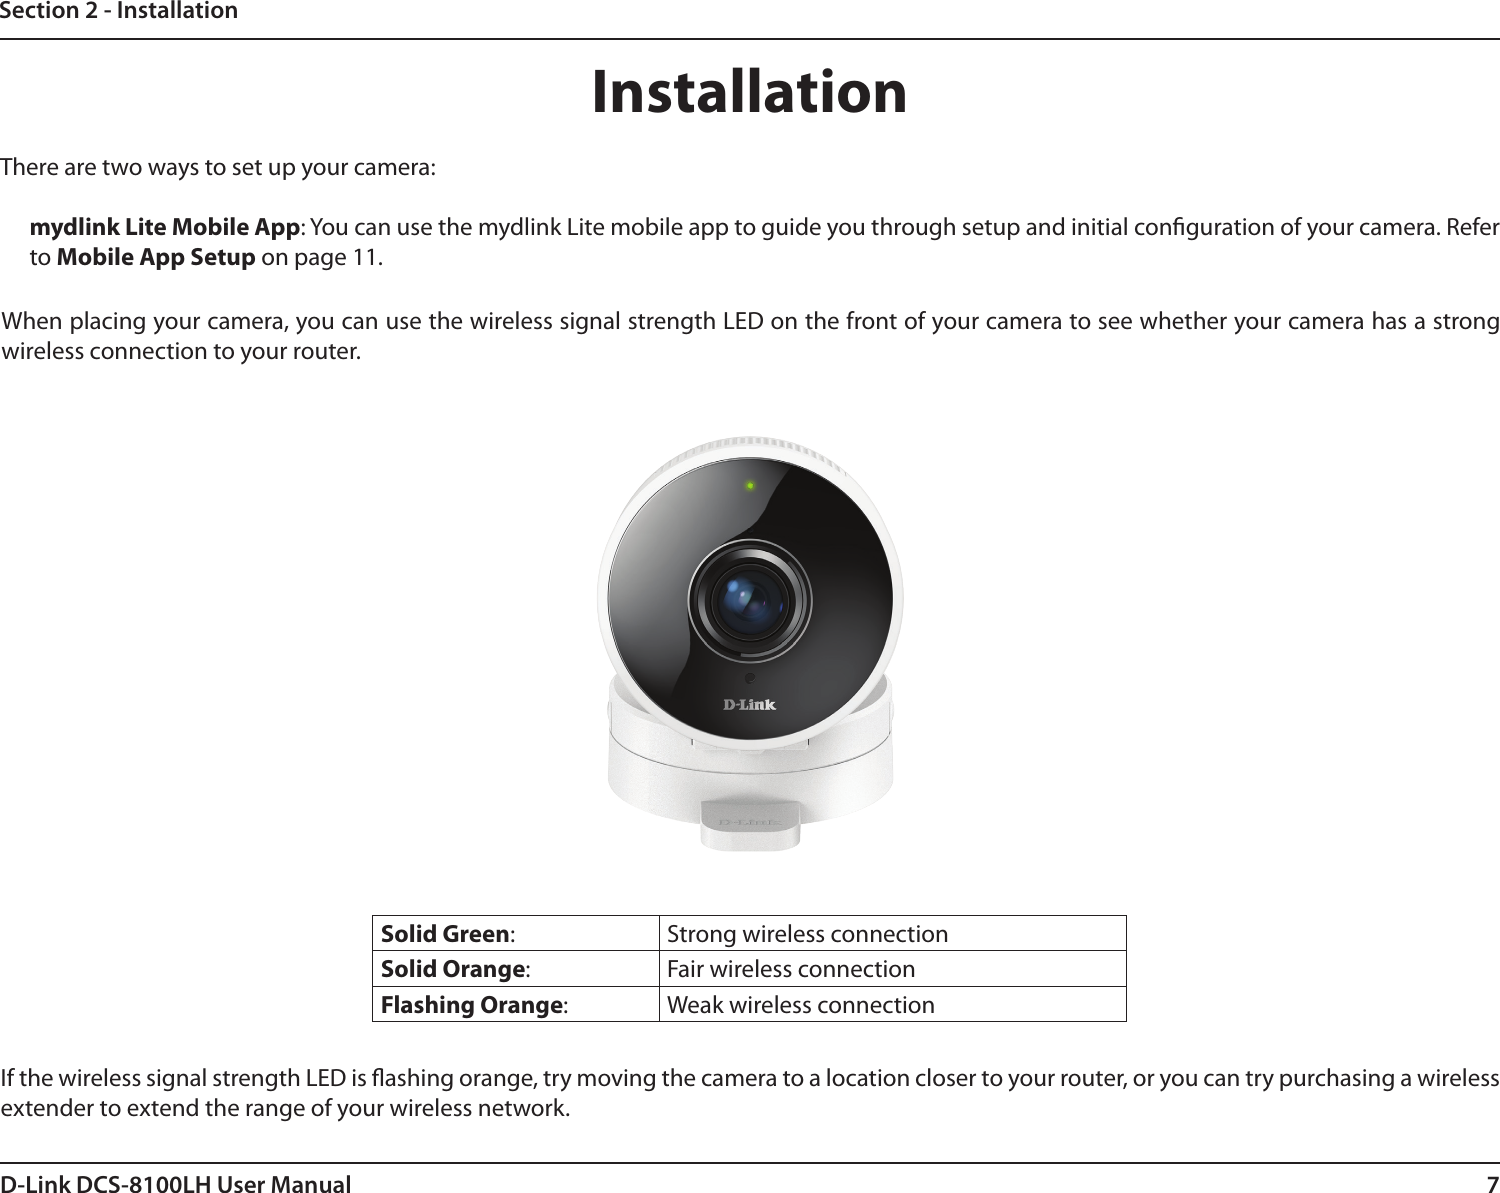 7D-Link DCS-8100LH User ManualSection 2 - InstallationInstallationThere are two ways to set up your camera:mydlink Lite Mobile App: You can use the mydlink Lite mobile app to guide you through setup and initial conguration of your camera. Refer to Mobile App Setup on page 11.Solid Green:  Strong wireless connectionSolid Orange:  Fair wireless connectionFlashing Orange:  Weak wireless connectionIf the wireless signal strength LED is ashing orange, try moving the camera to a location closer to your router, or you can try purchasing a wireless extender to extend the range of your wireless network.When placing your camera, you can use the wireless signal strength LED on the front of your camera to see whether your camera has a strong wireless connection to your router.